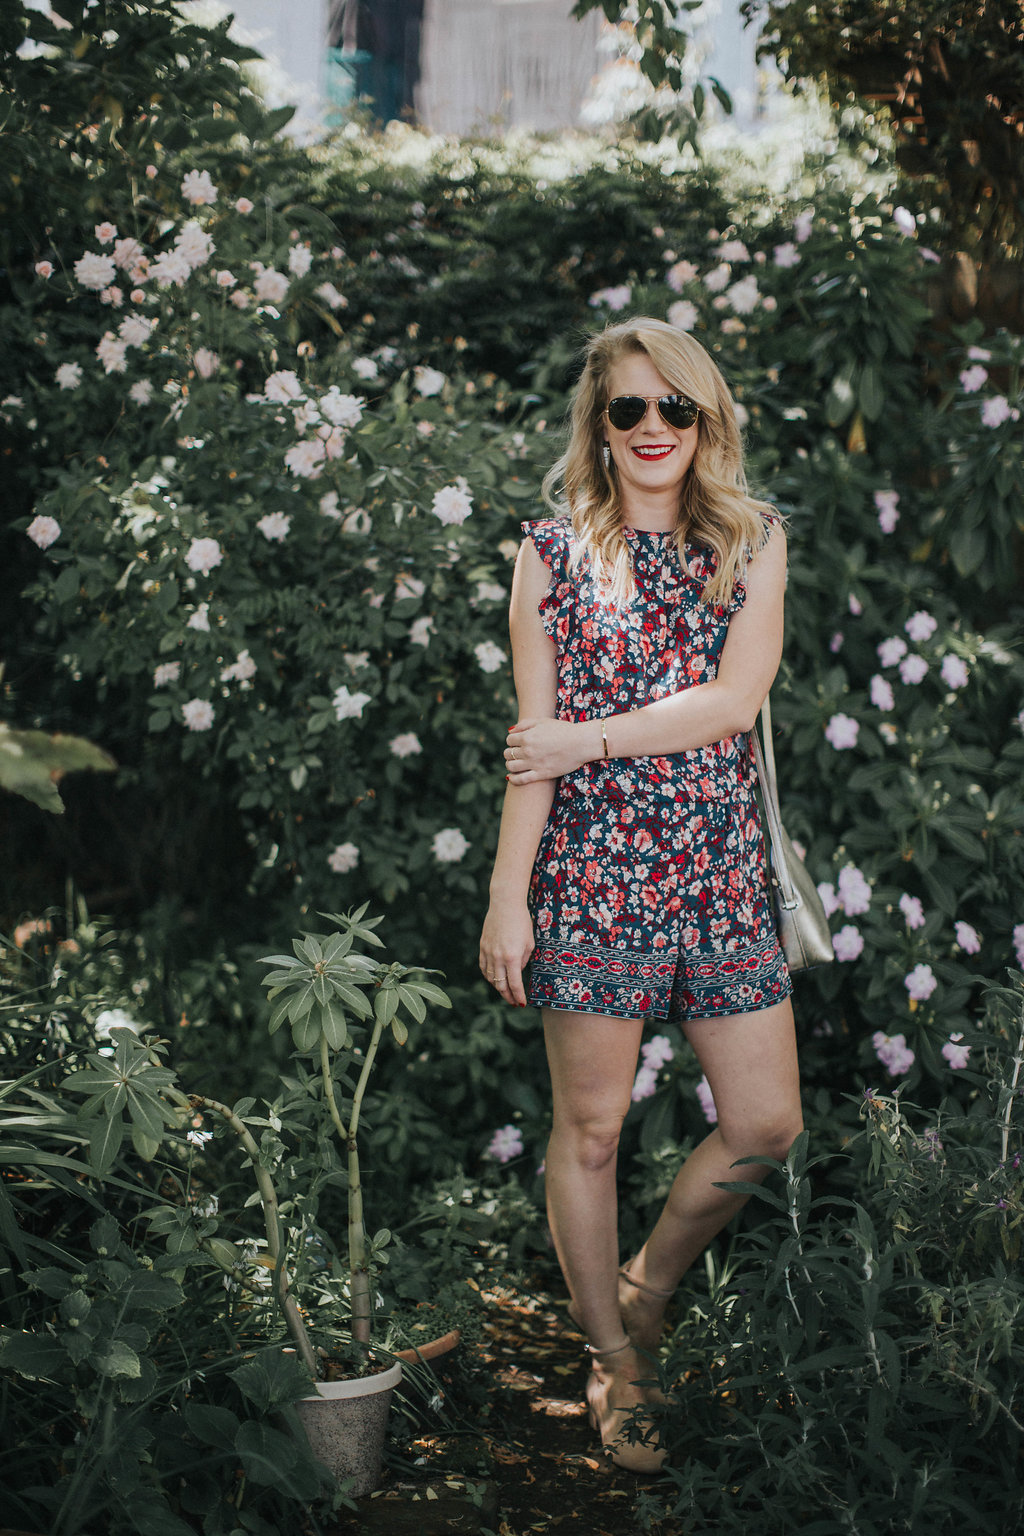 The Best Floral Romper for Summer from LOFT